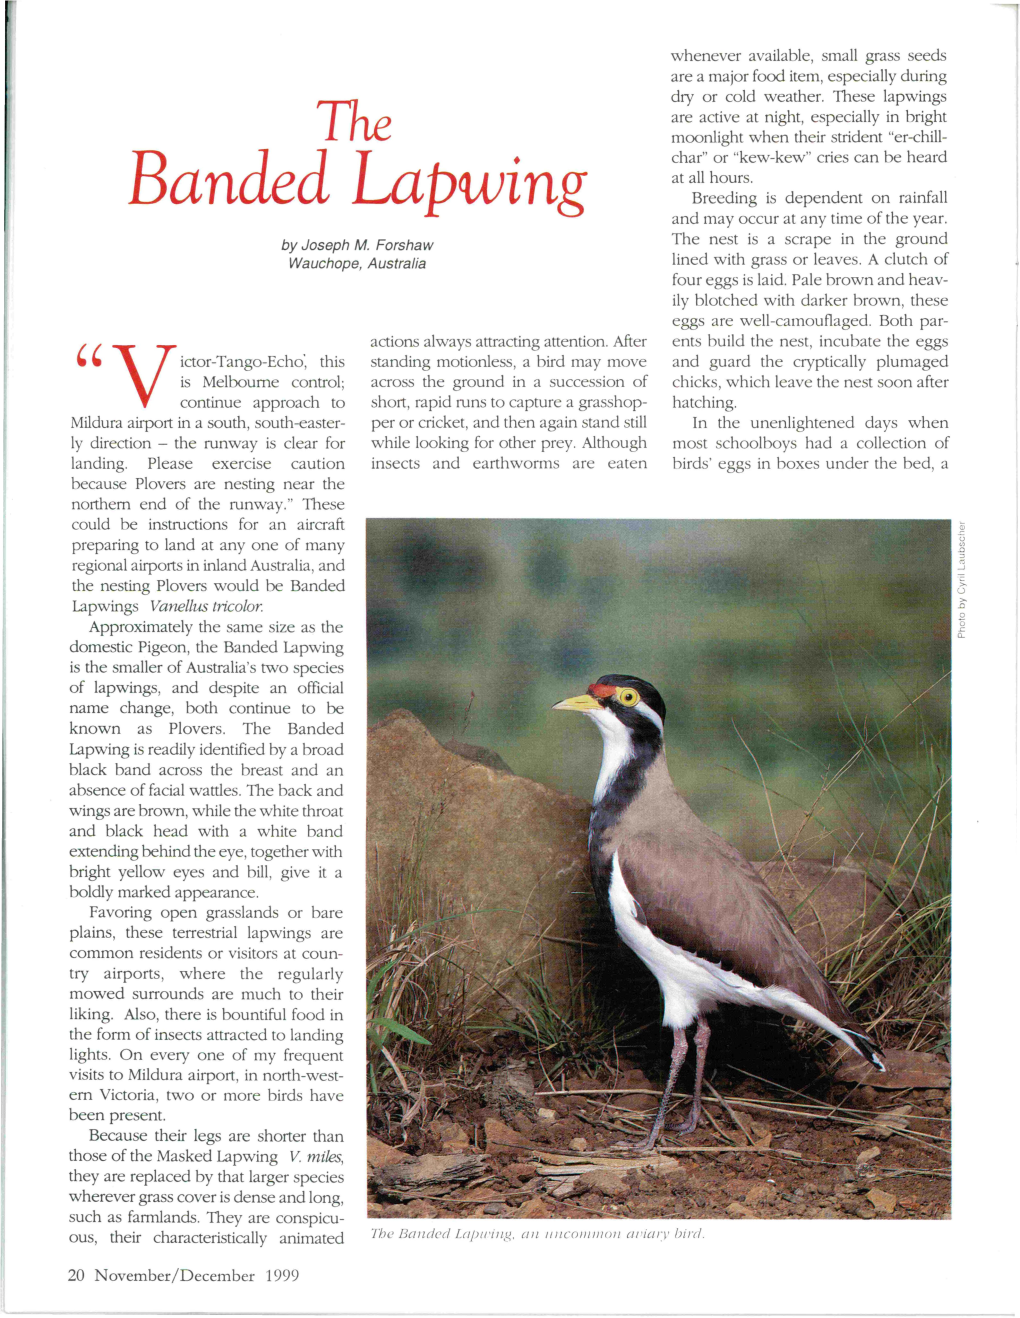 Banded Lapwing Breeding Is Dependent on Rainfall and May Occur at Any Time of the Year